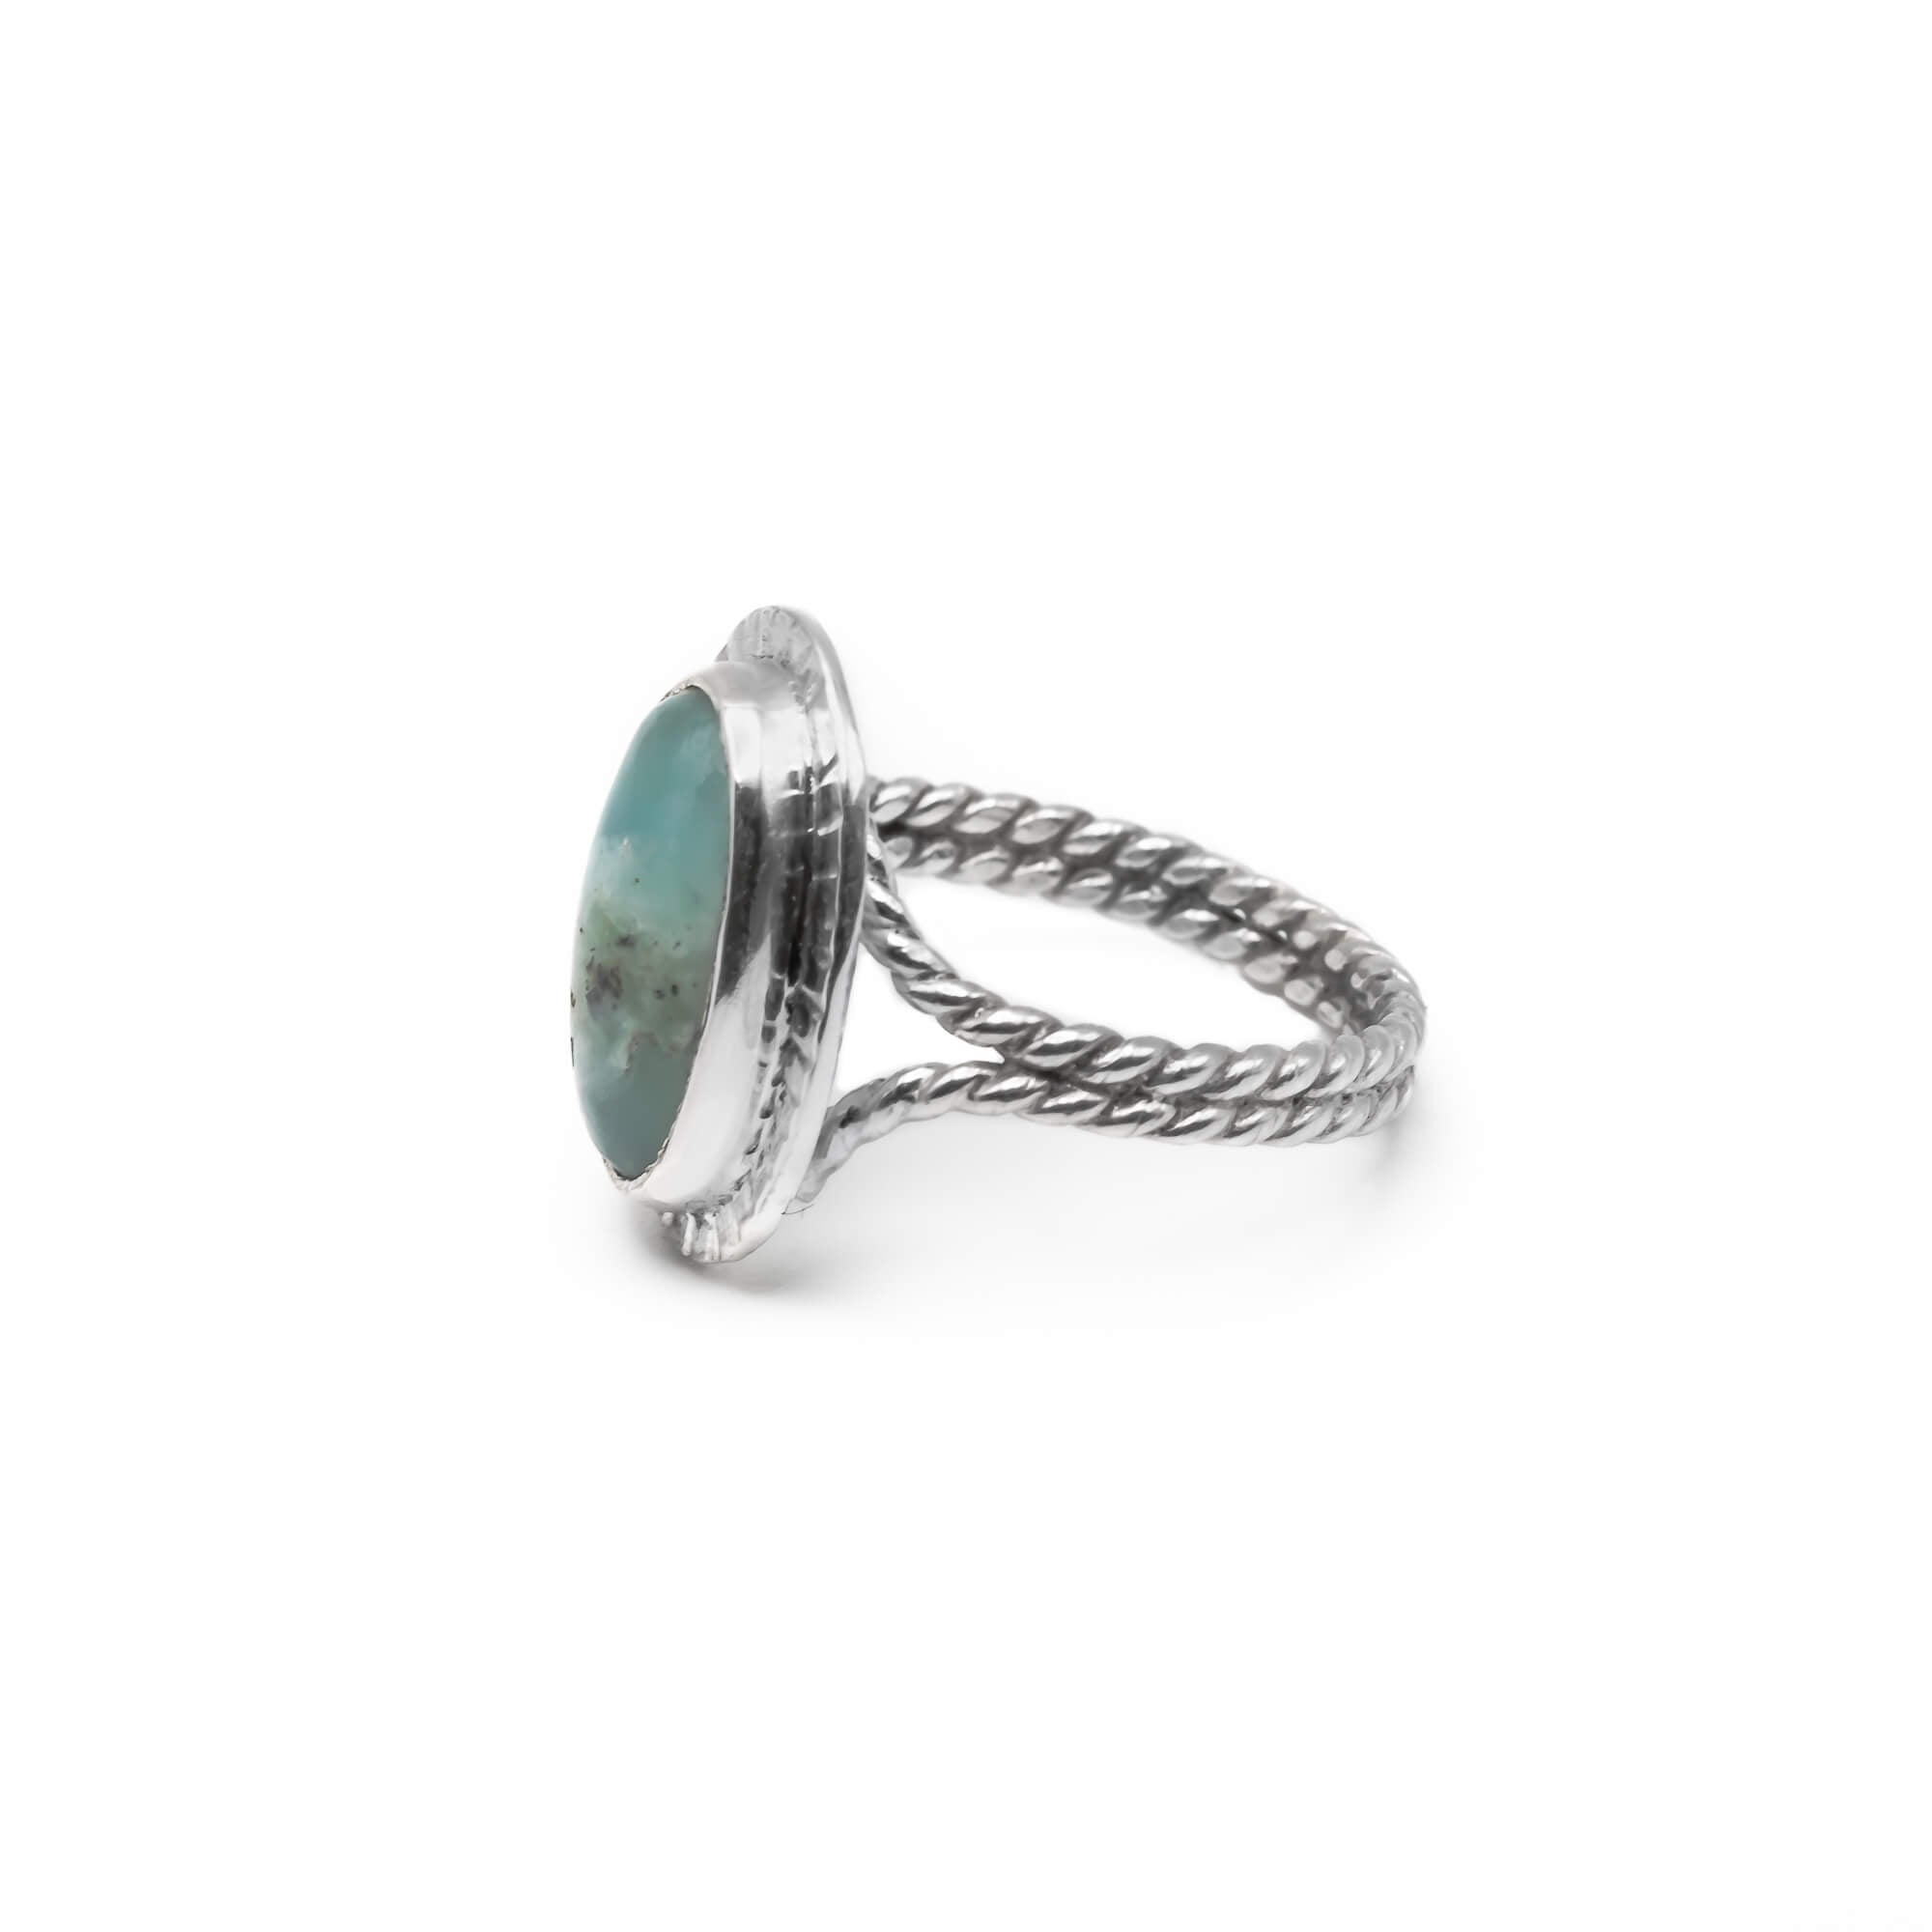    Blue-opal-sterling-silver-ring-side-view